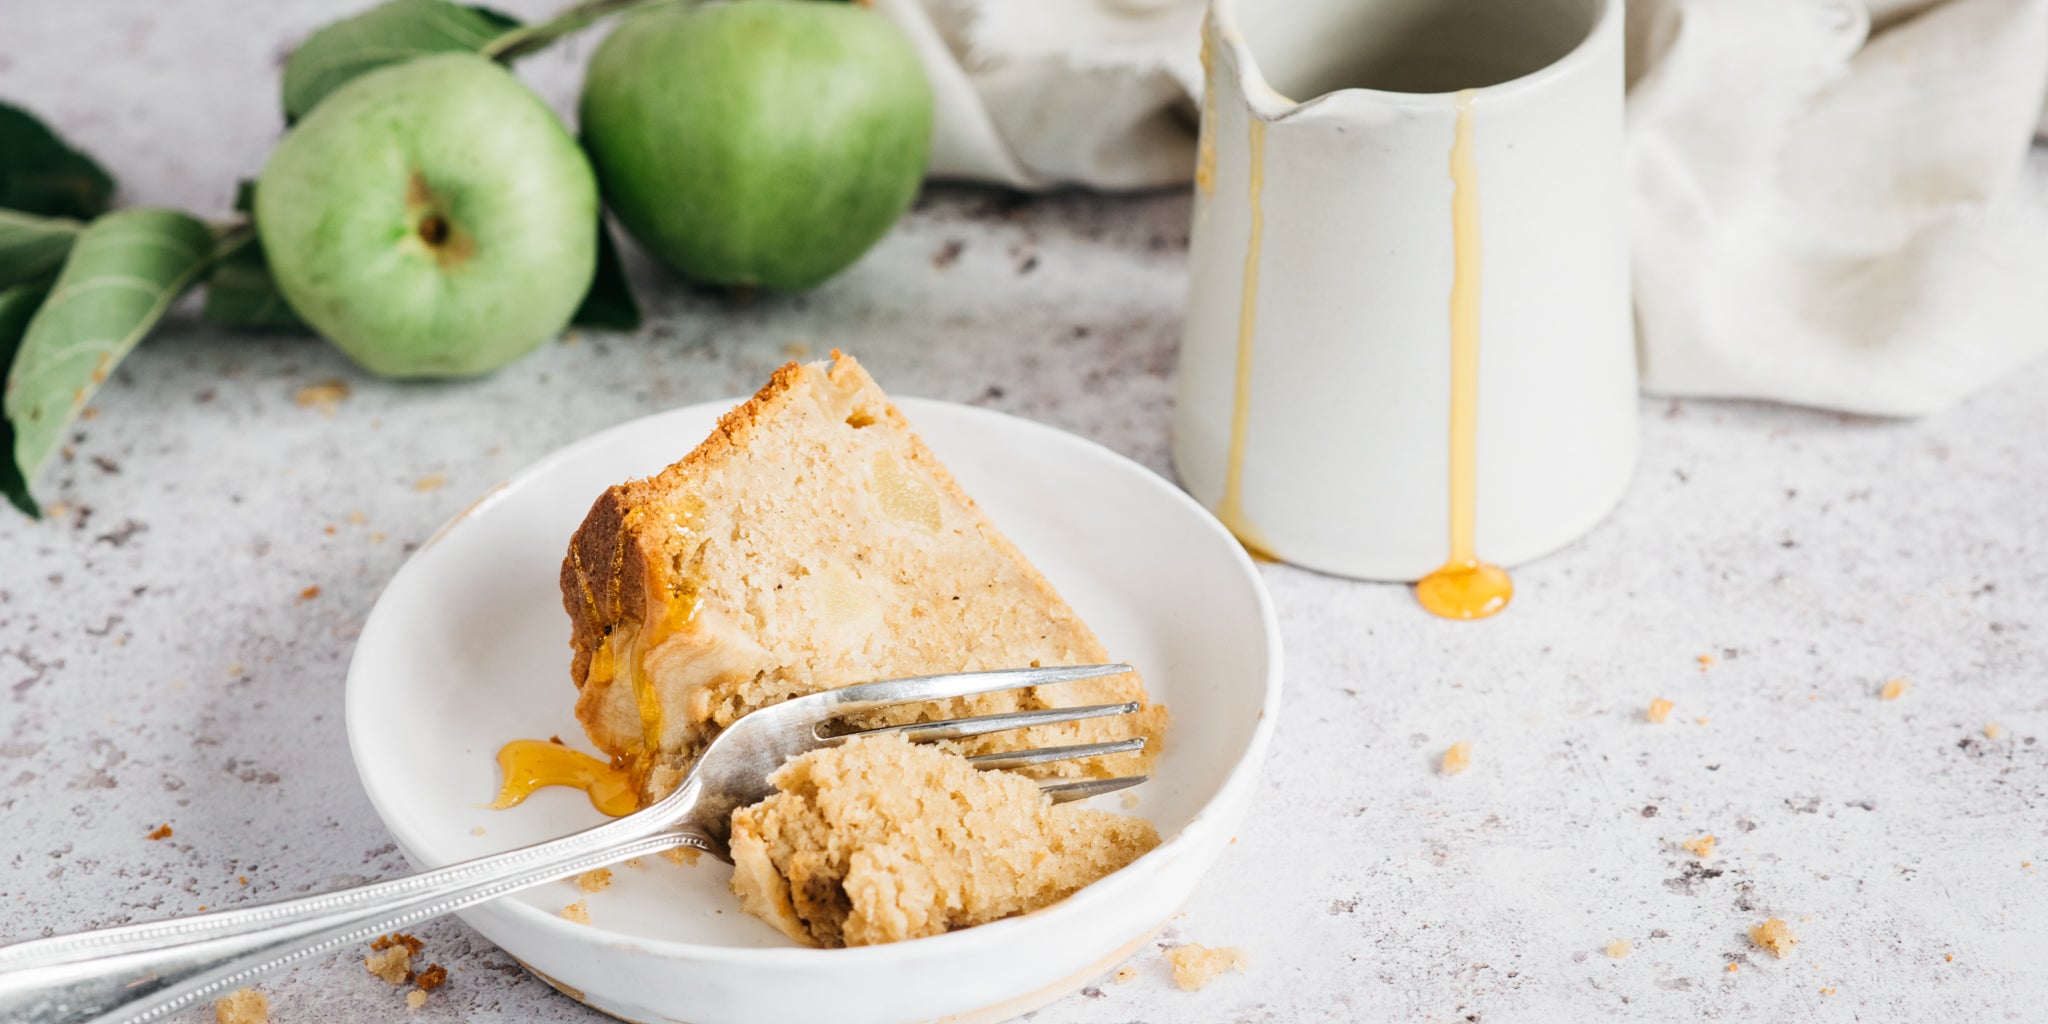 Slice of apple cake on plate with fork and jug in background